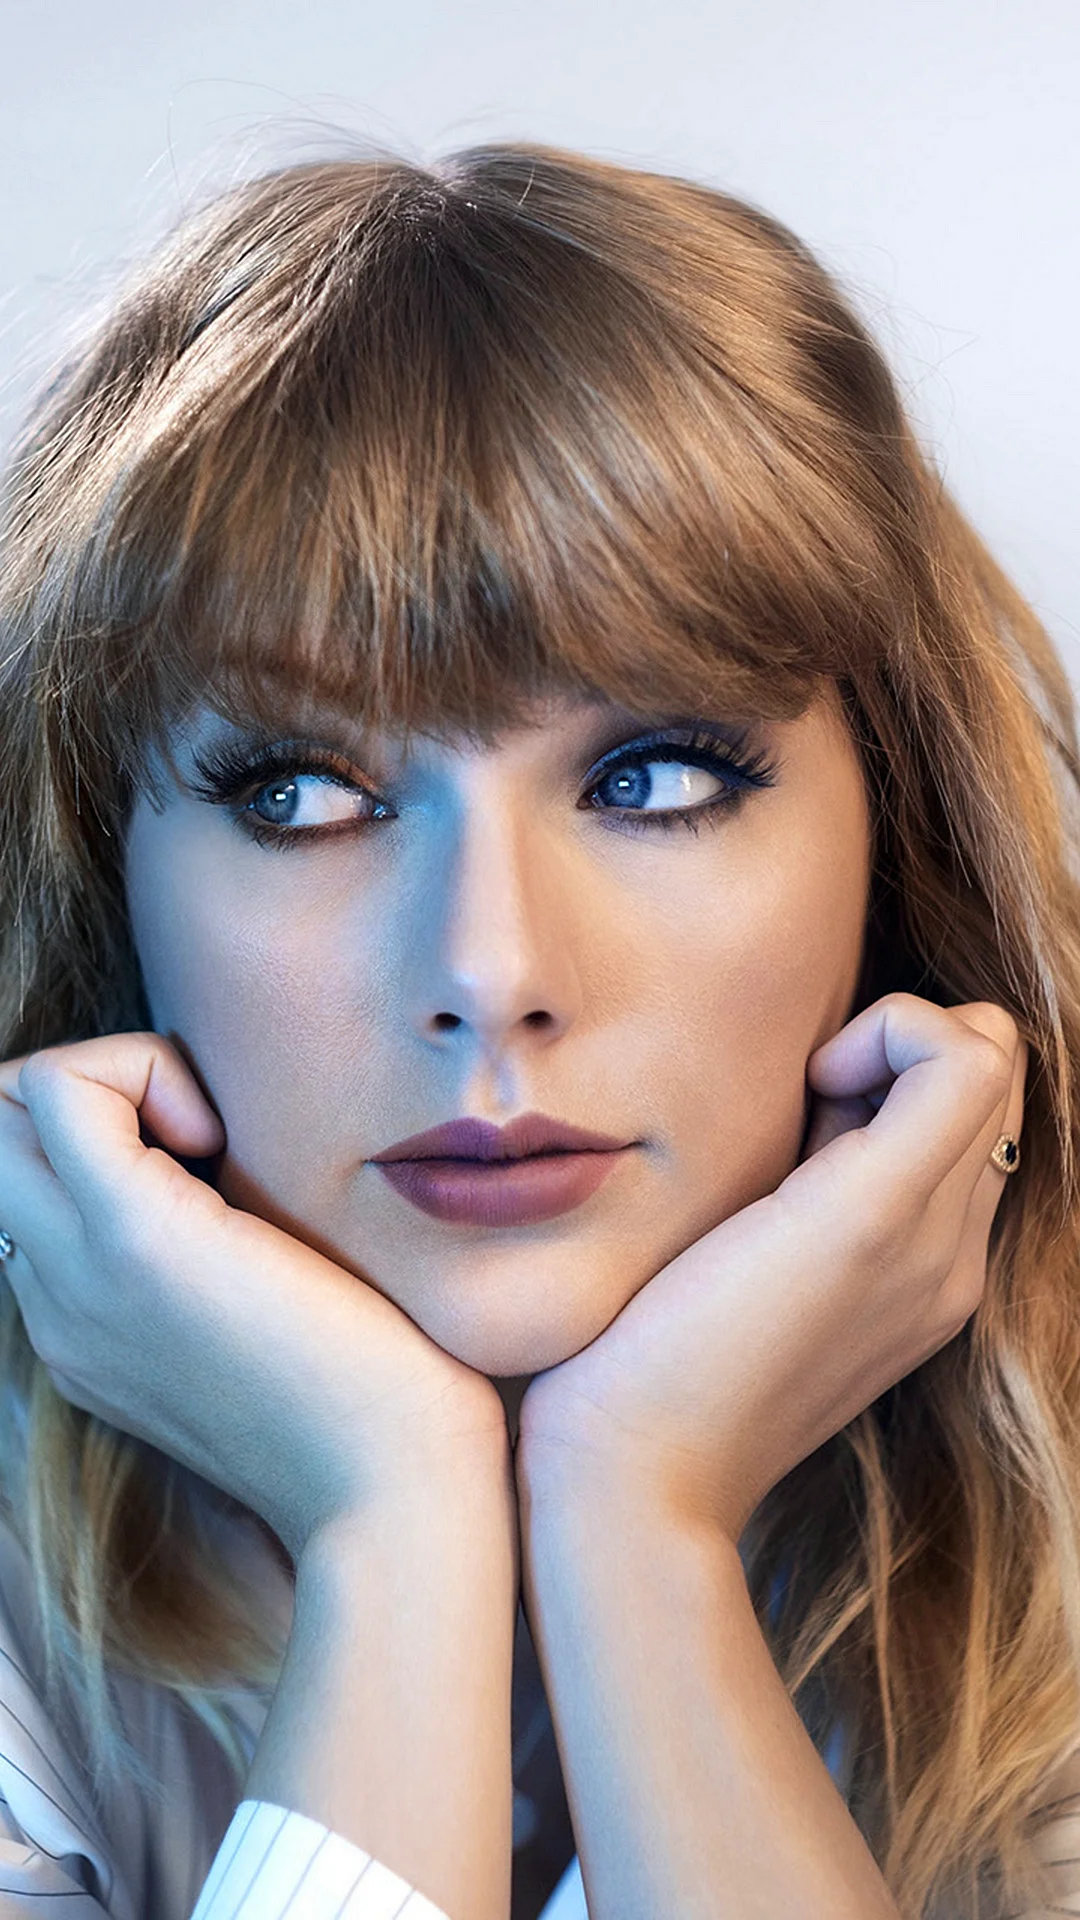 Taylor Swift Eyes Wallpaper For iPhone